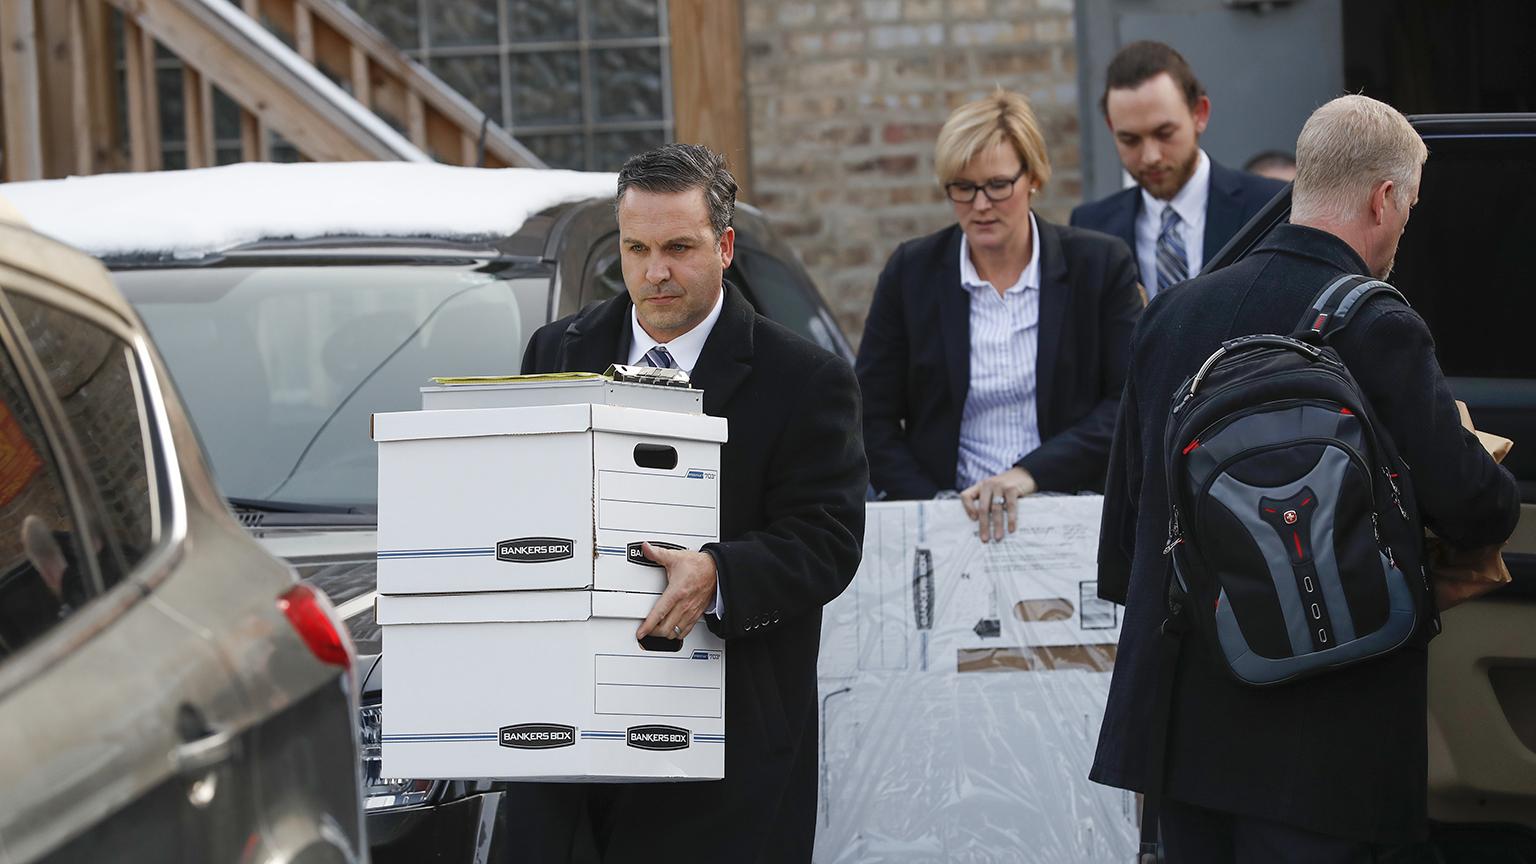 Investigators carry boxes away from Ald. Ed. Burke’s 14th Ward office on the city’s Southwest Side on Thursday, Nov. 29, 2018. (Jose M. Osorio / Chicago Tribune via AP)